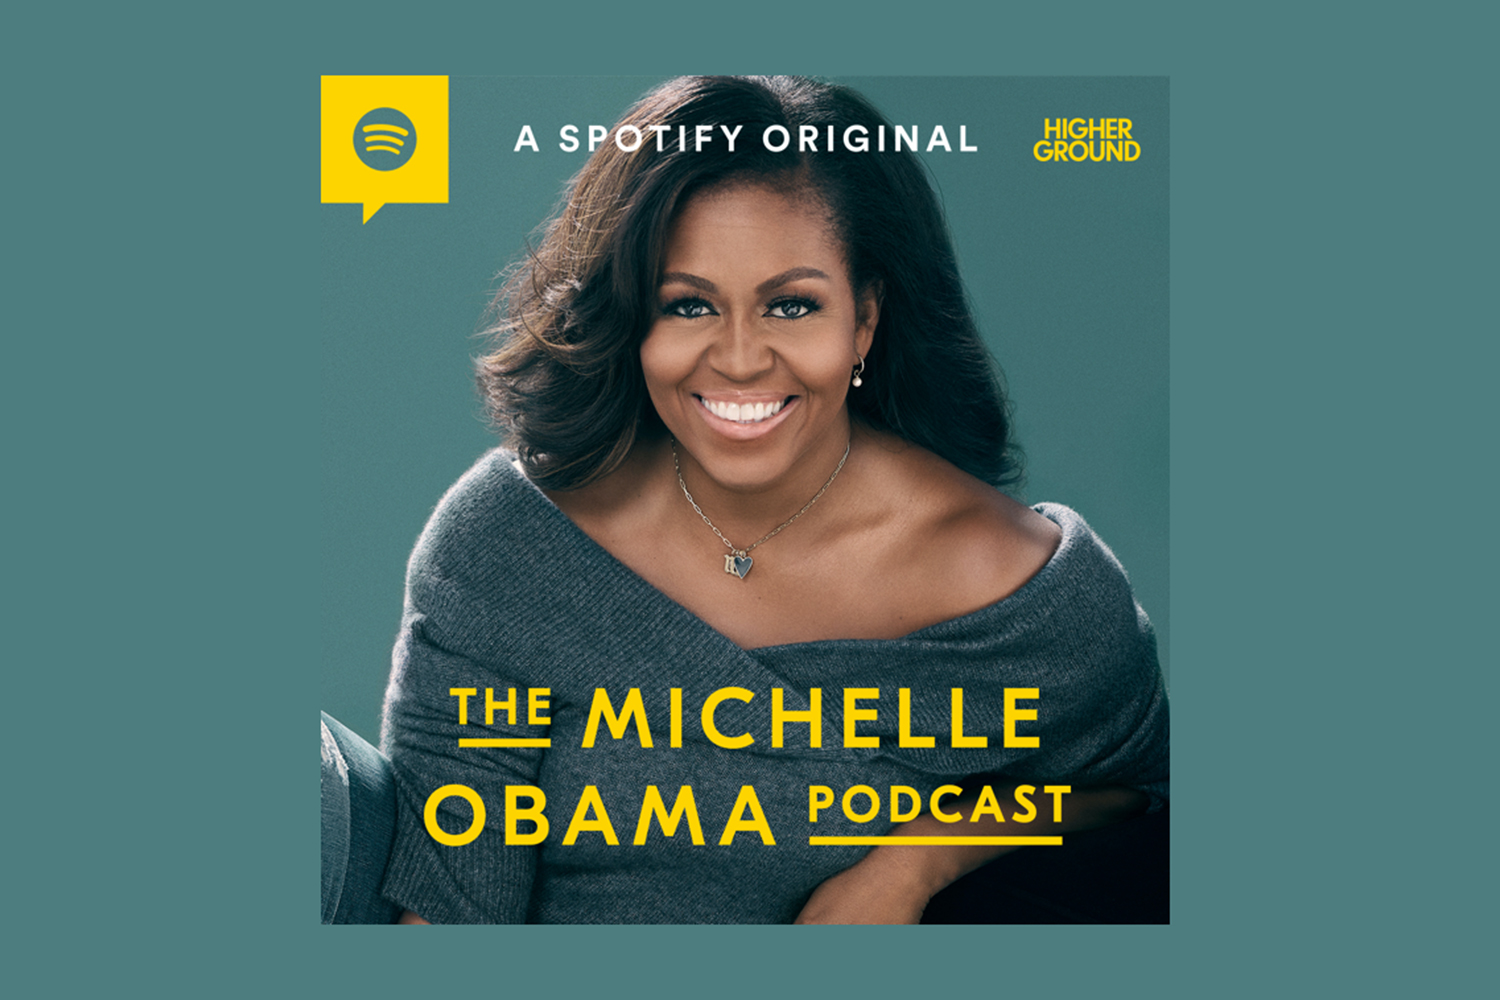 The Michelle Obama Podcast Spotify icon and logo